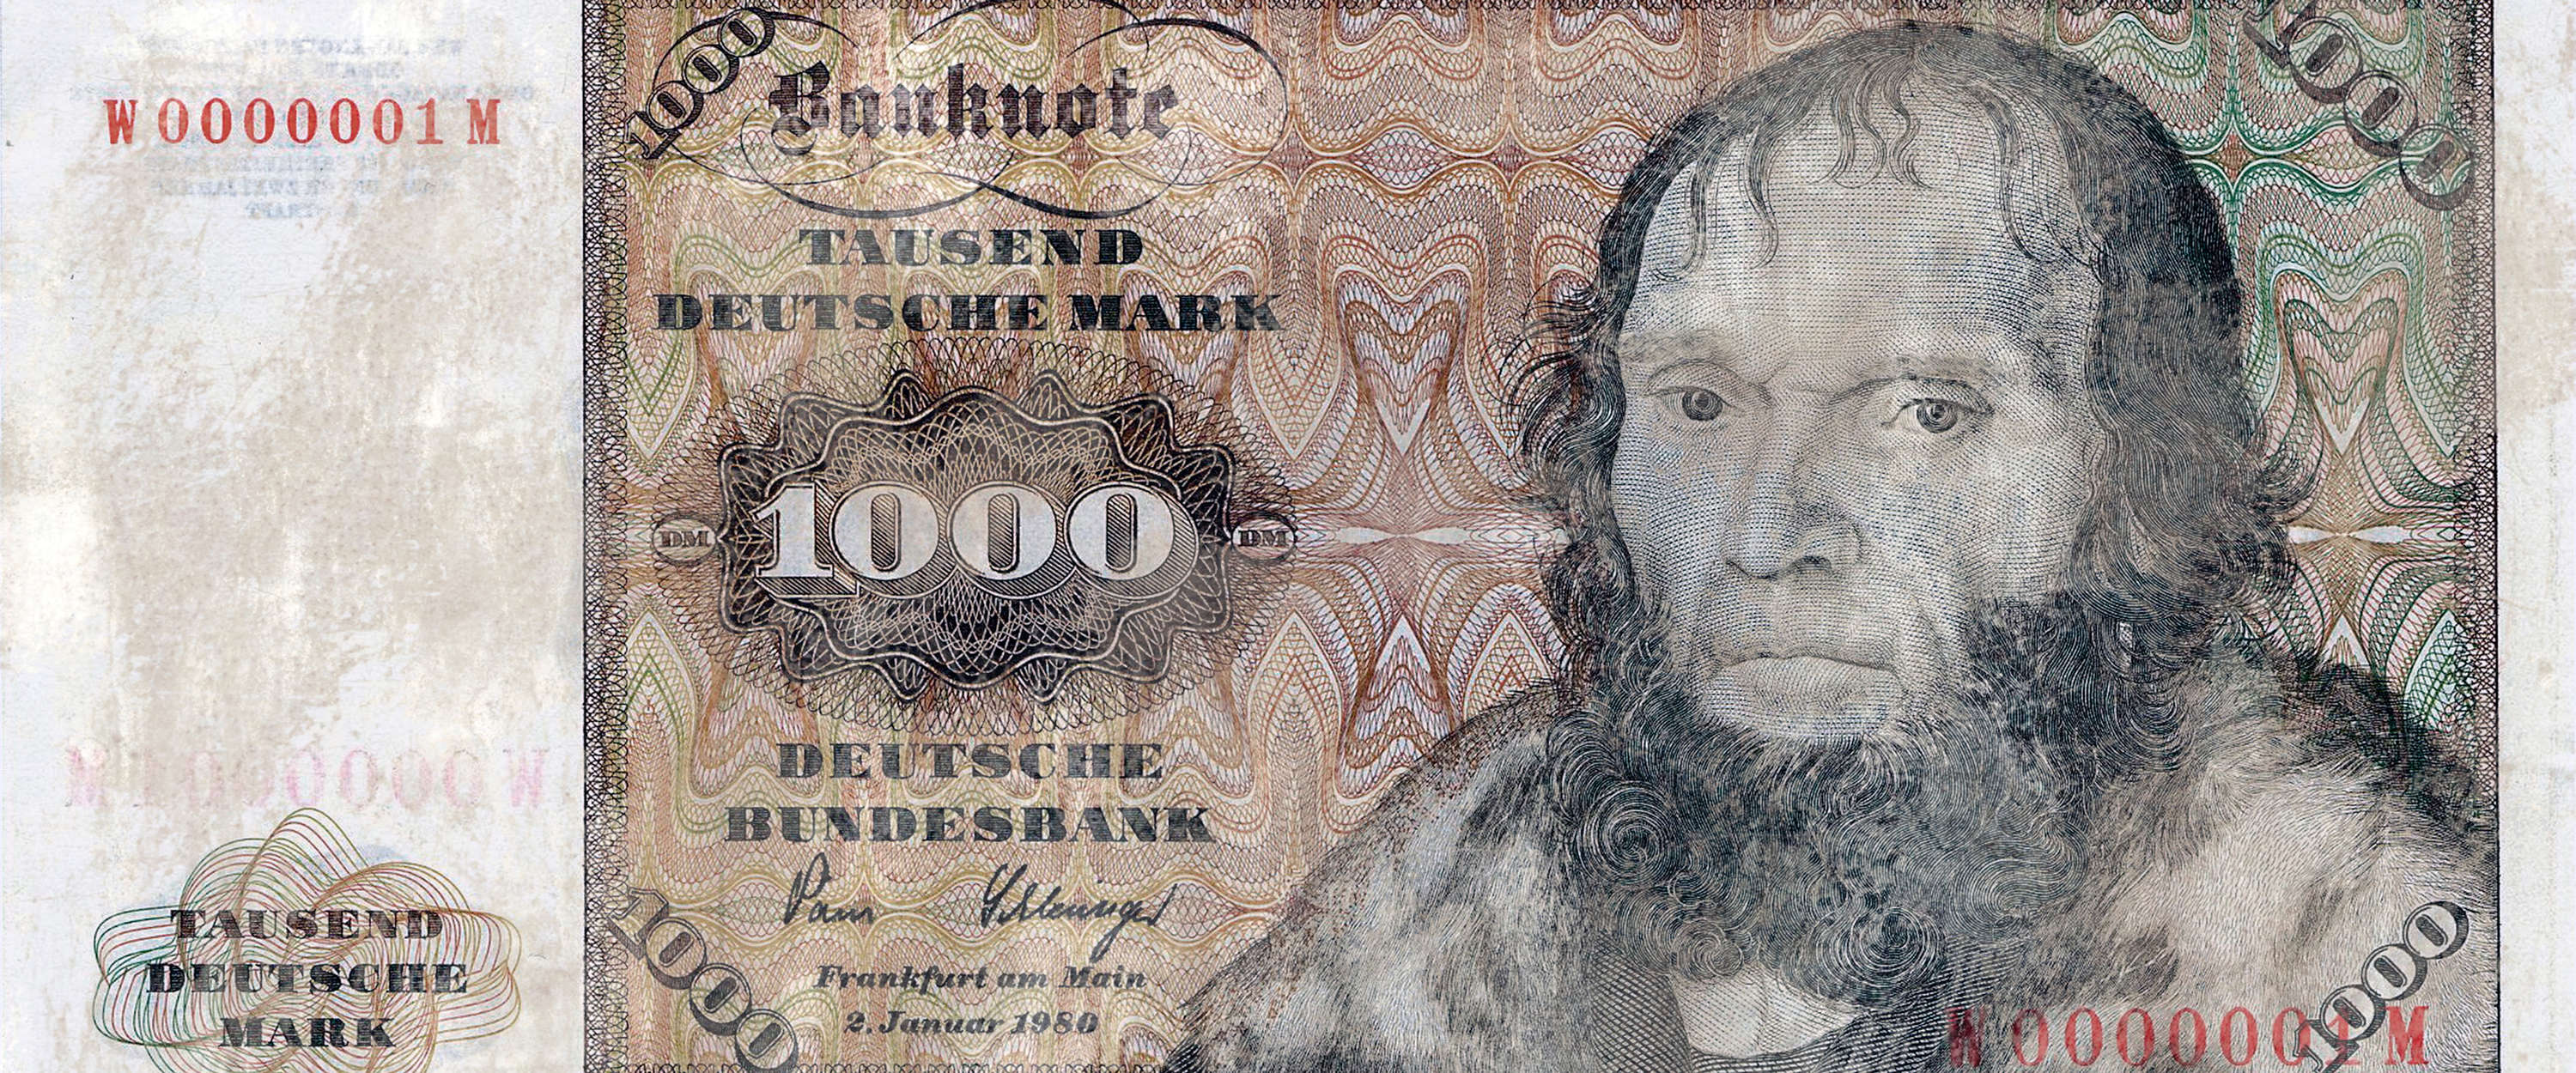             Photo wallpaper historical banknote - thousand marks
        